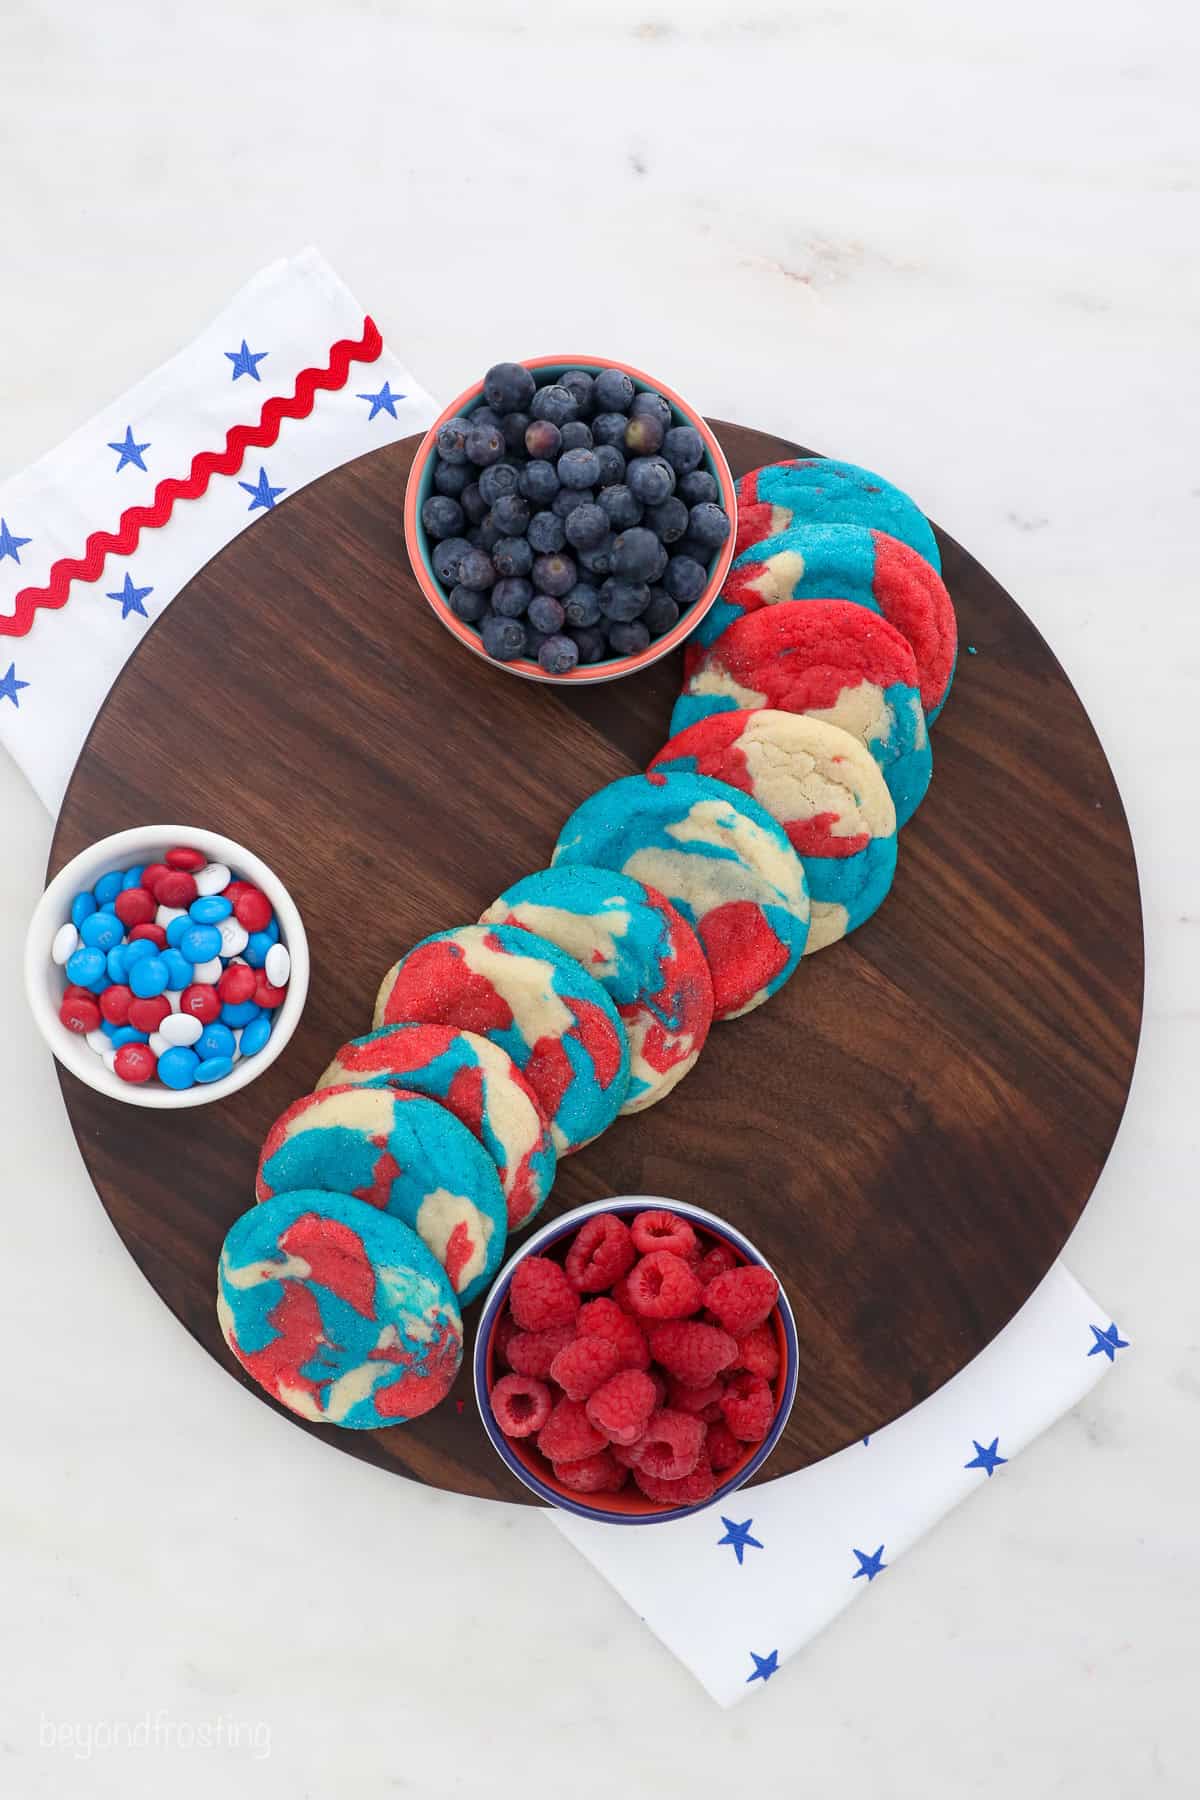 Overhead view of a partially assembled 4th of July dessert board with red, white, and blue themed nibbles.